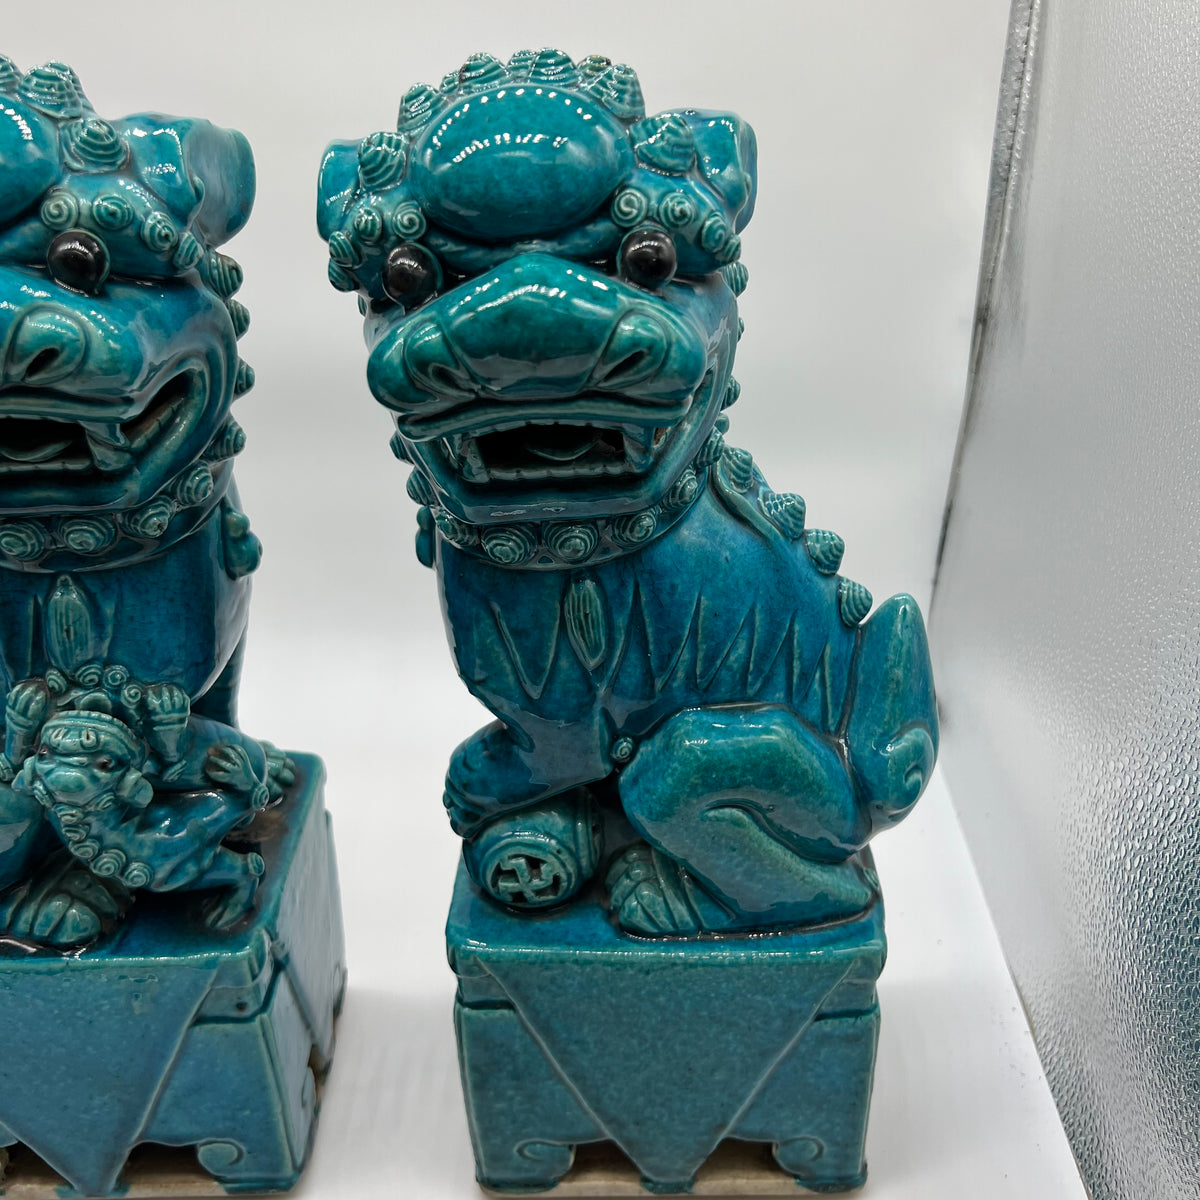 Large and lovely pair of Chinese Foo Dogs, biscuit-turquoise colored male and female foo dogs. &nbsp;Circa 1880